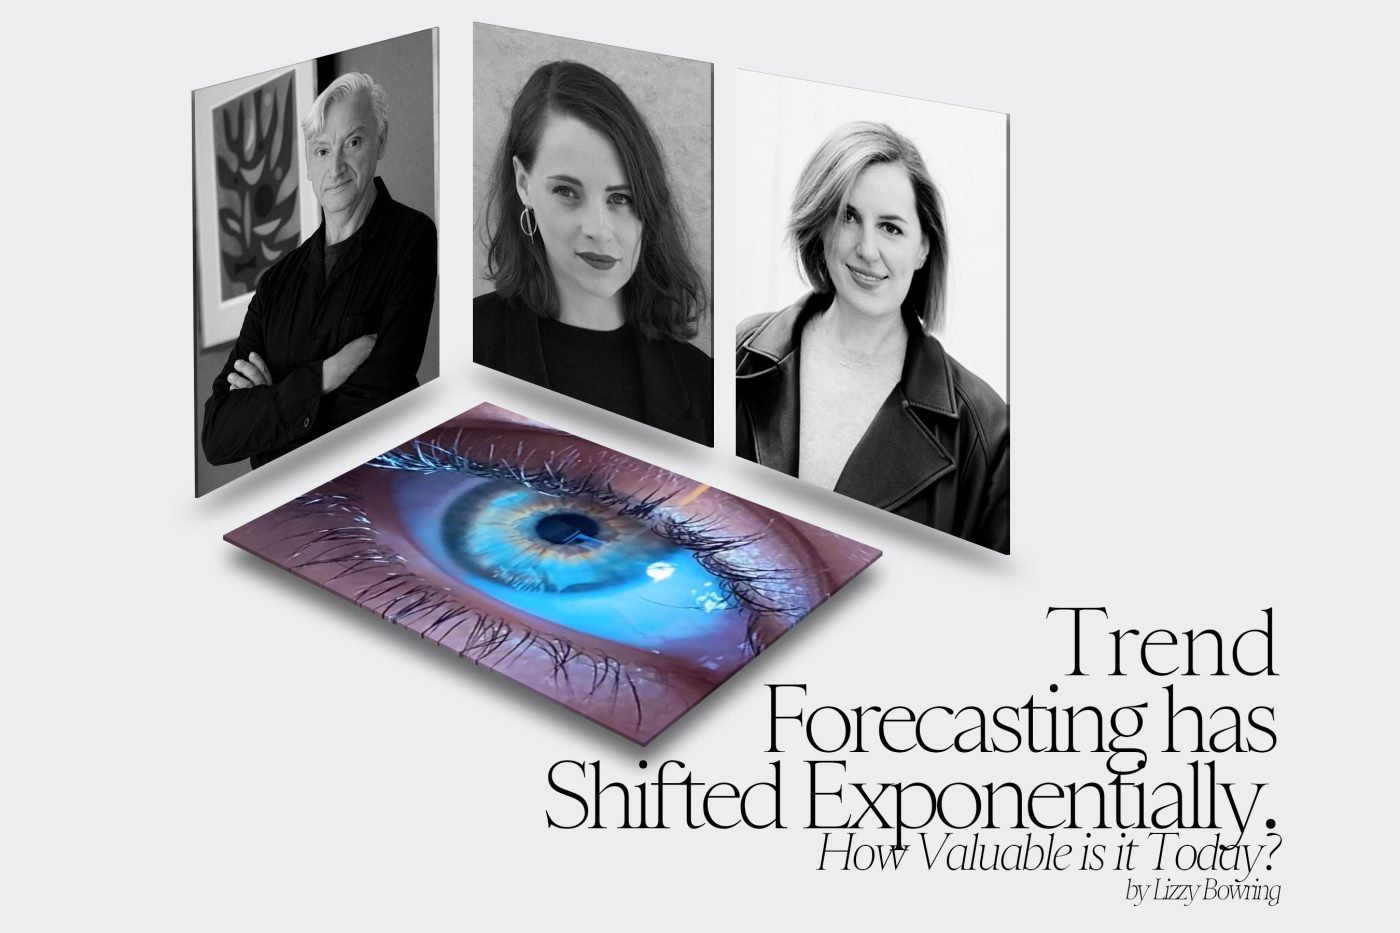 Trend Forecasting has Shifted Exponentially news article header image with headshots